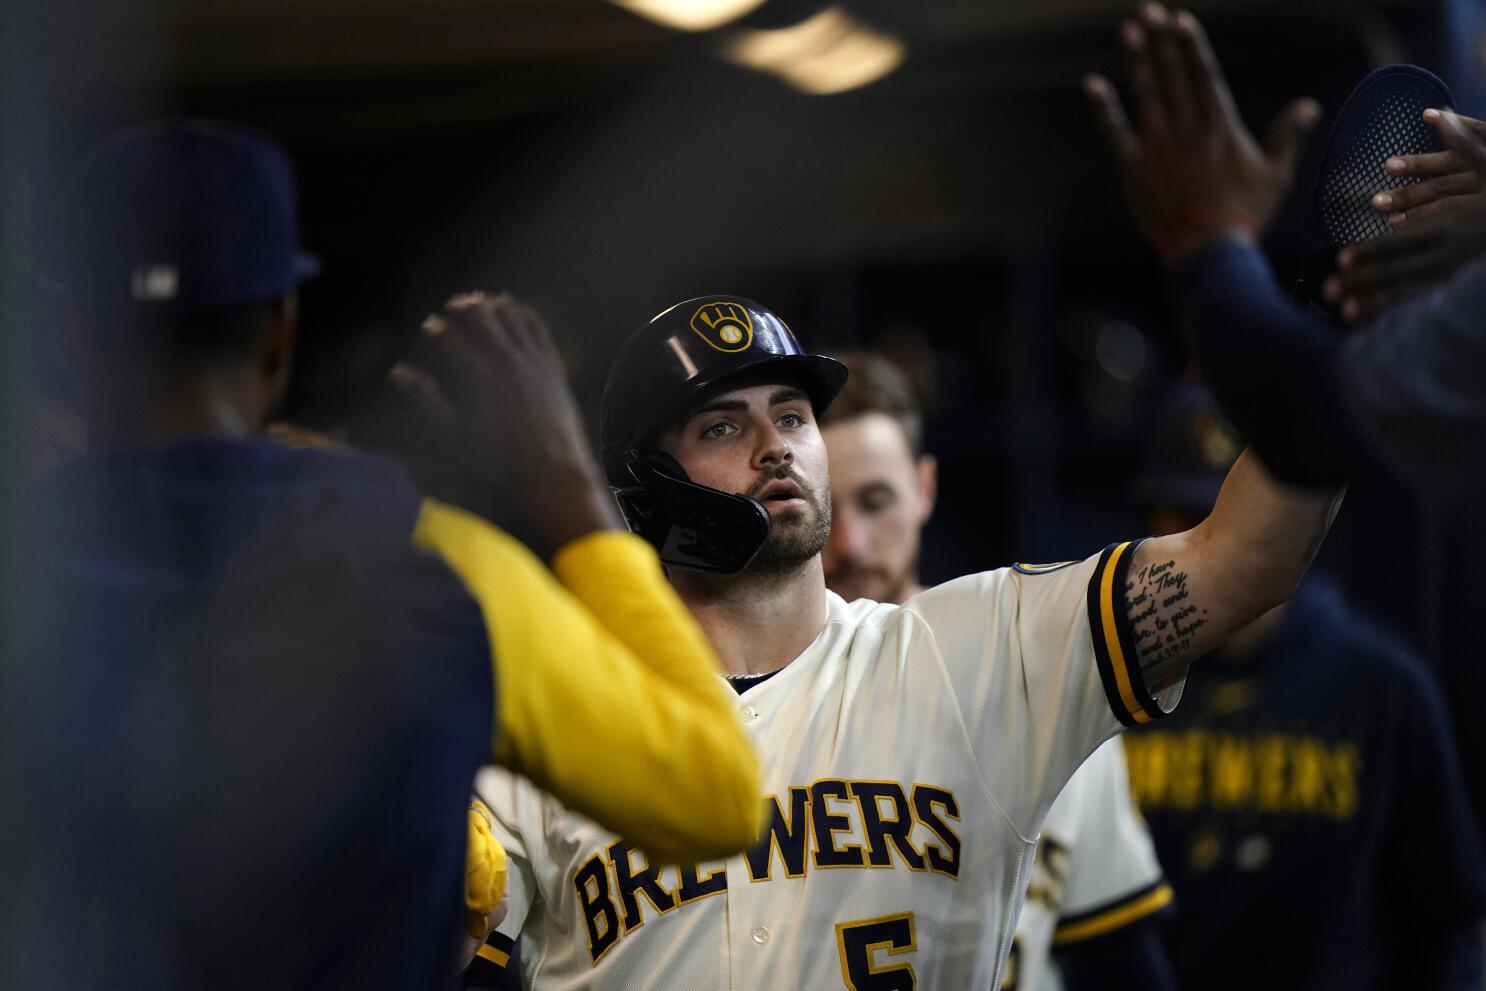 Mariners fall to Brewers for another extra-innings loss